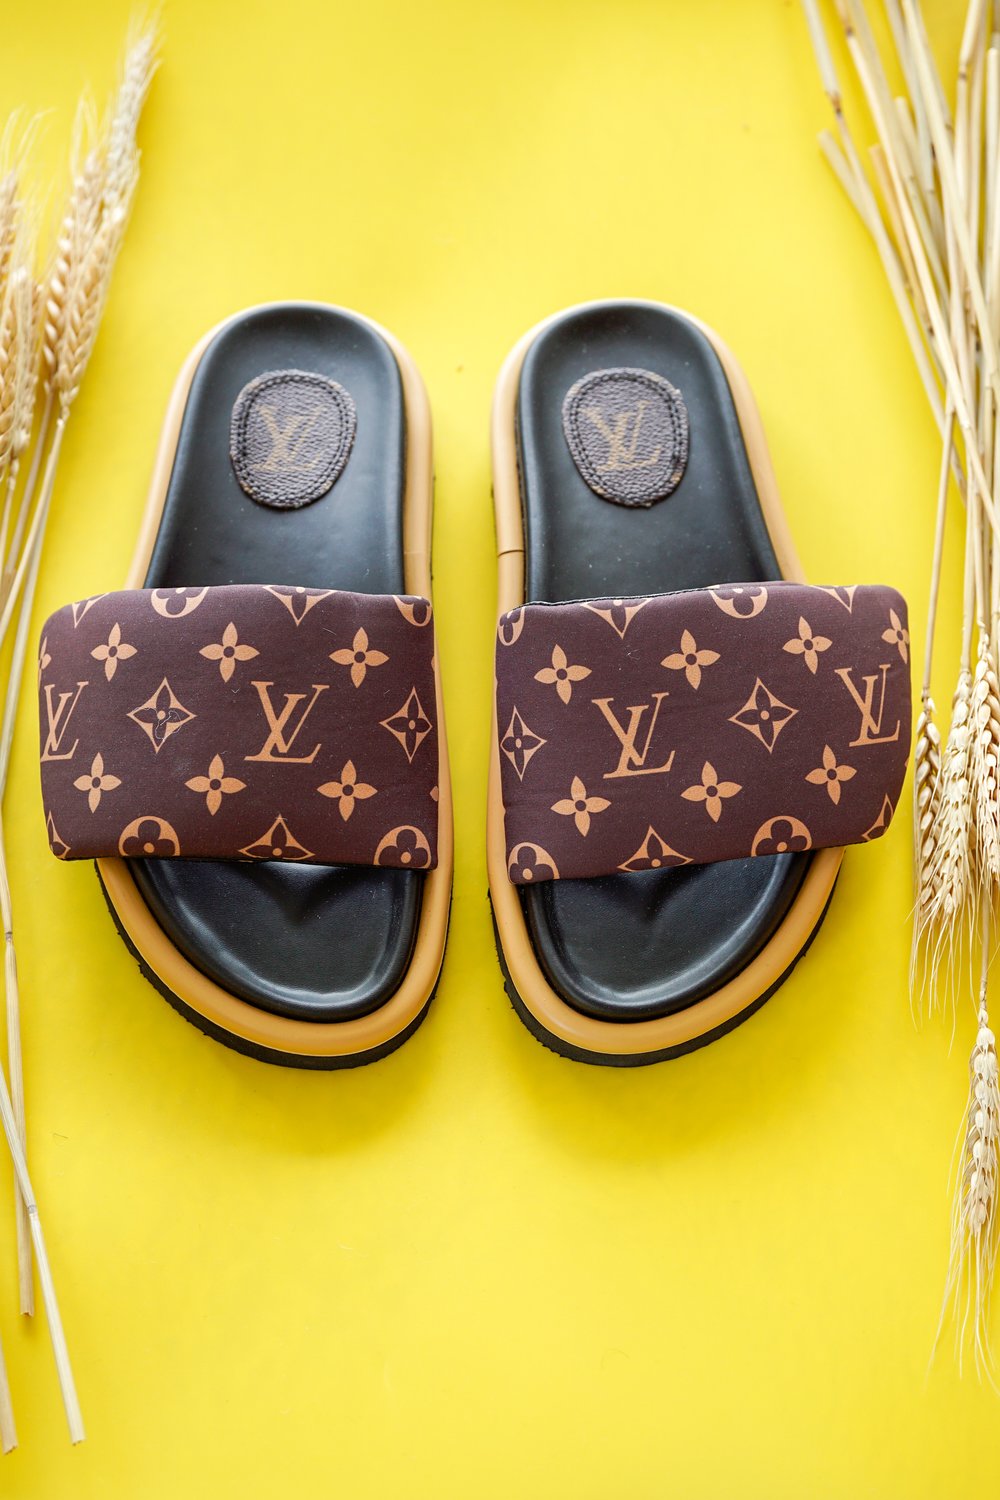 Louis Vuitton slides on a yellow background